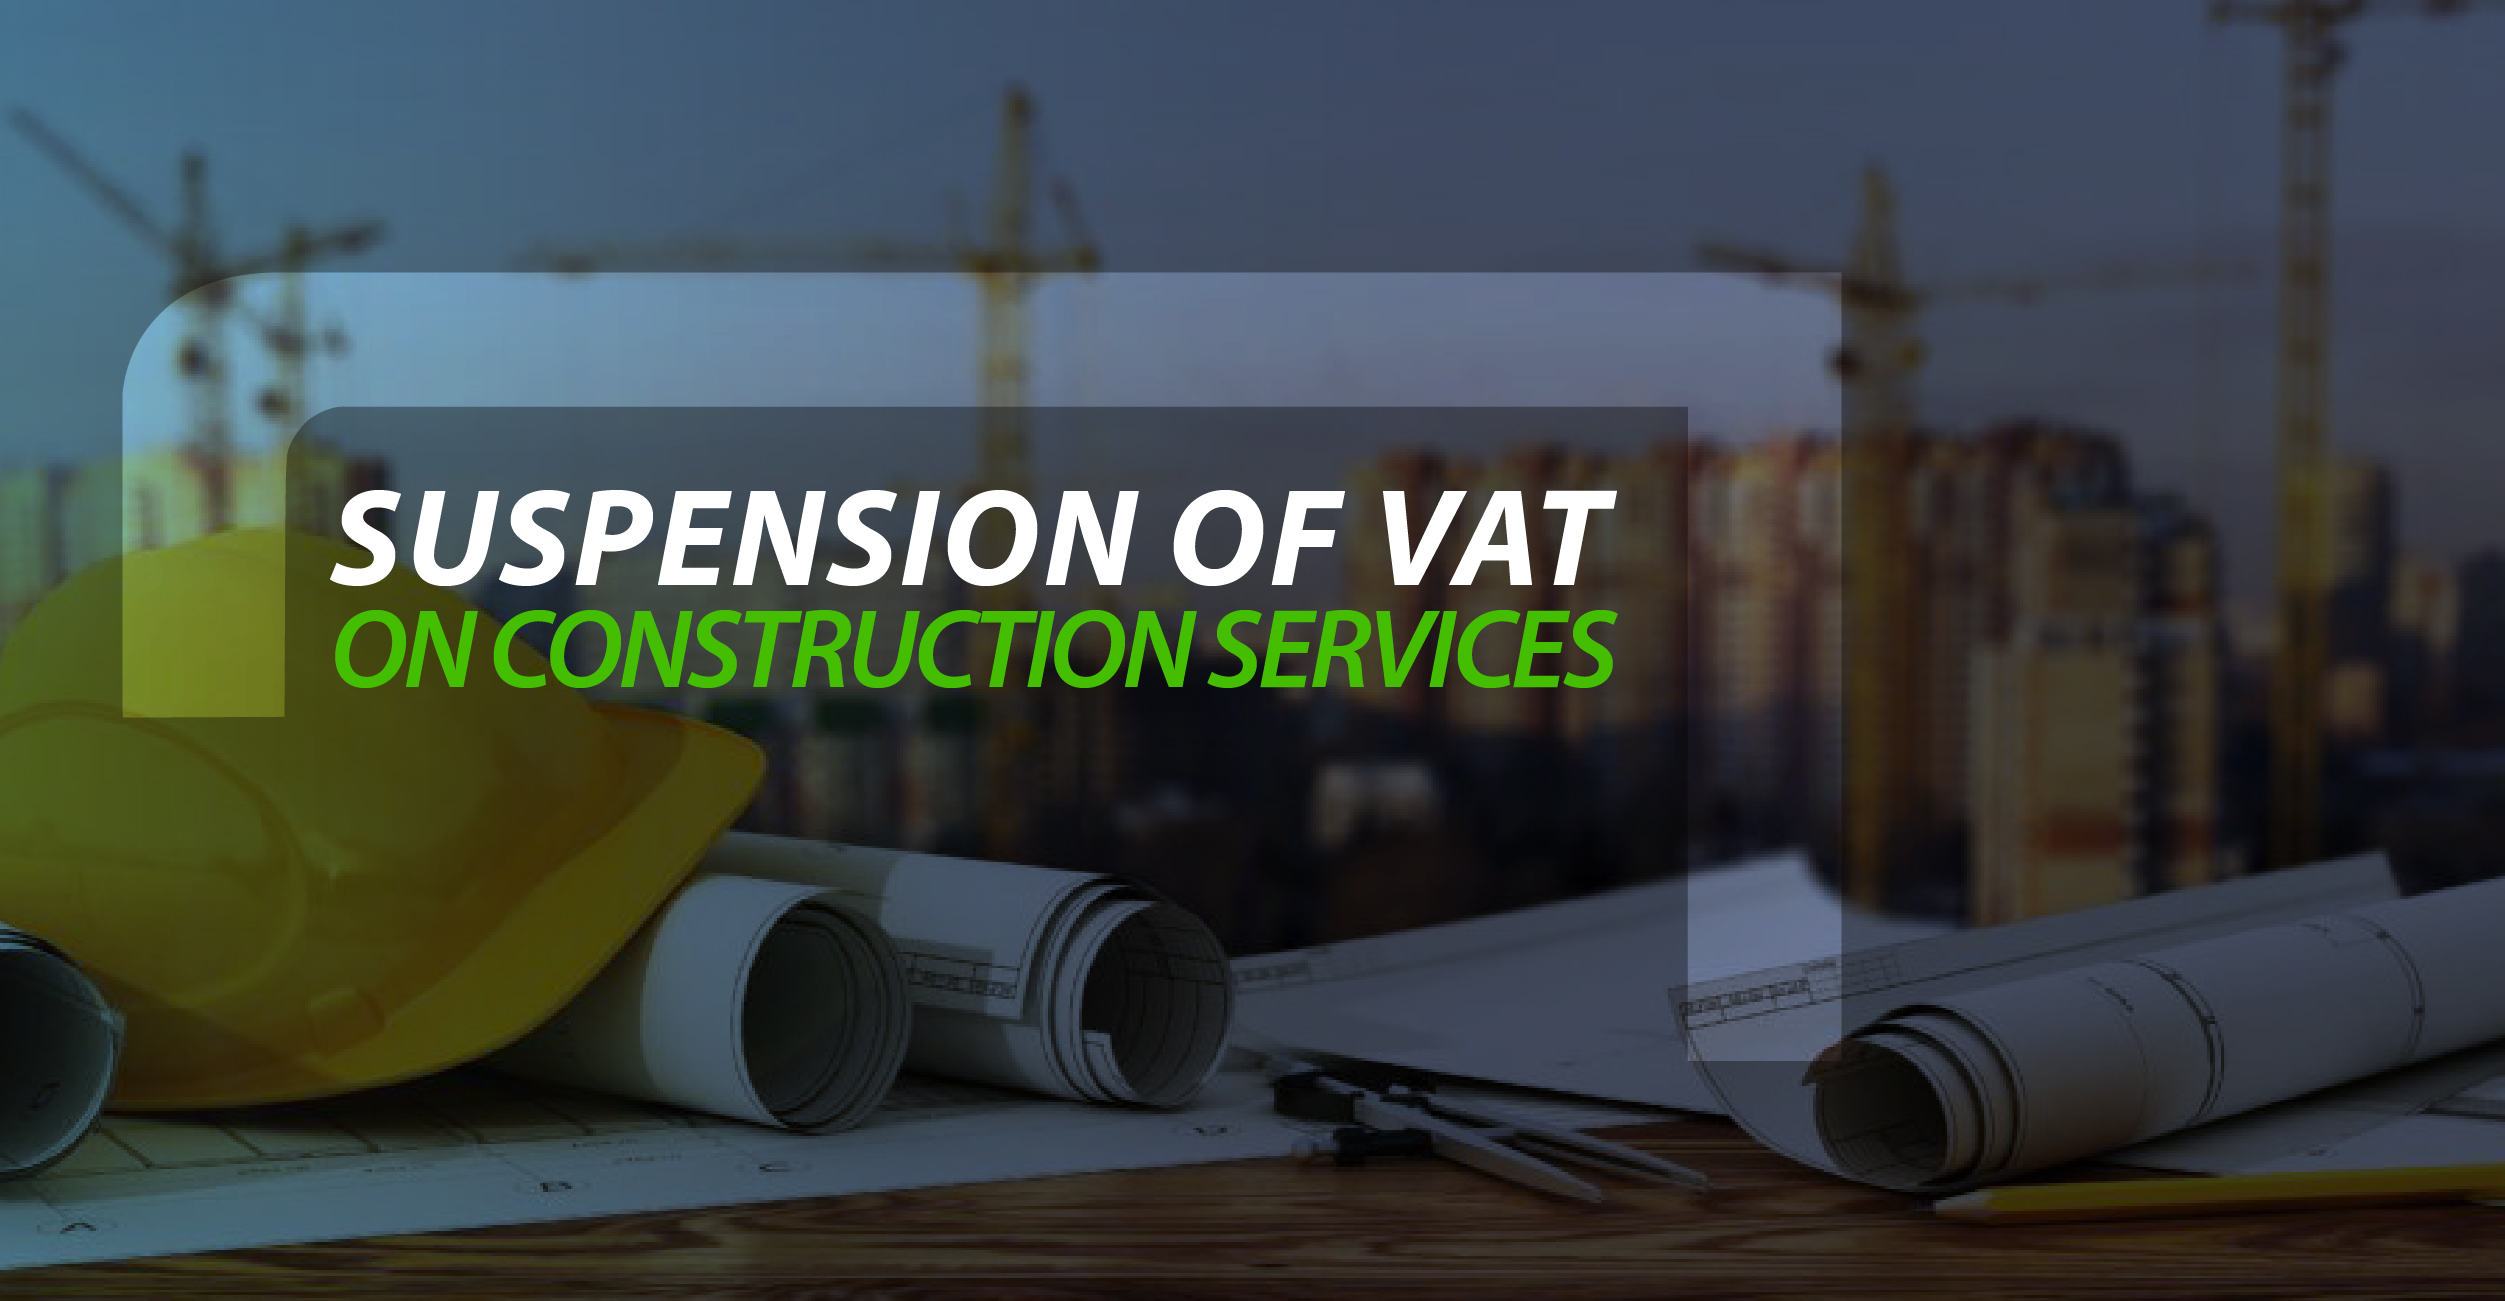 Suspension of VAT on construction services in Costa Rica